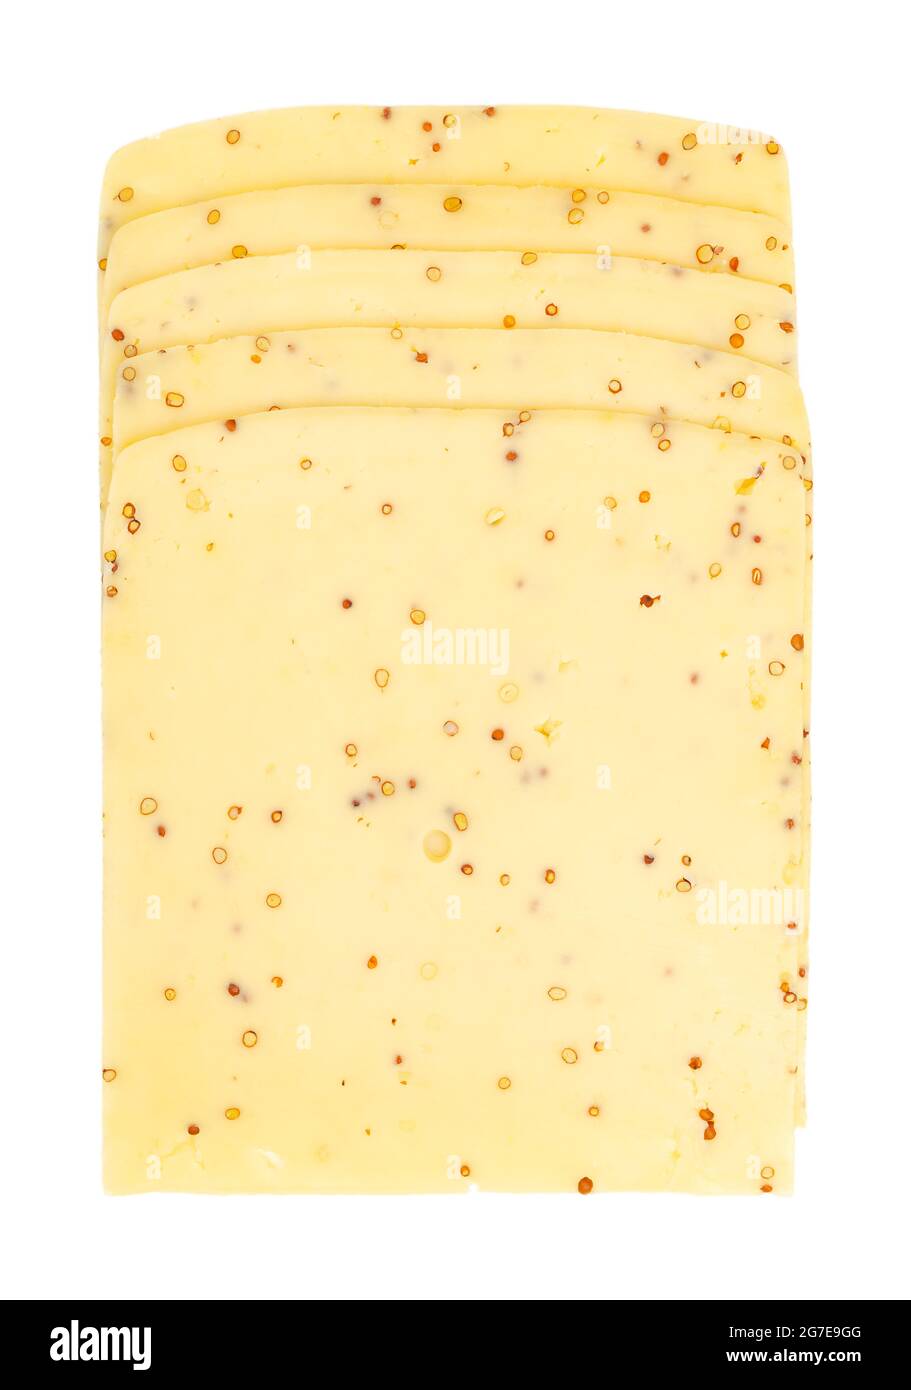 Mustard cheese slices. Stack of sliced cheddar for cheeseburgers, made of pasteurized milk and mustard seeds. Dairy product. Light yellow. Stock Photo